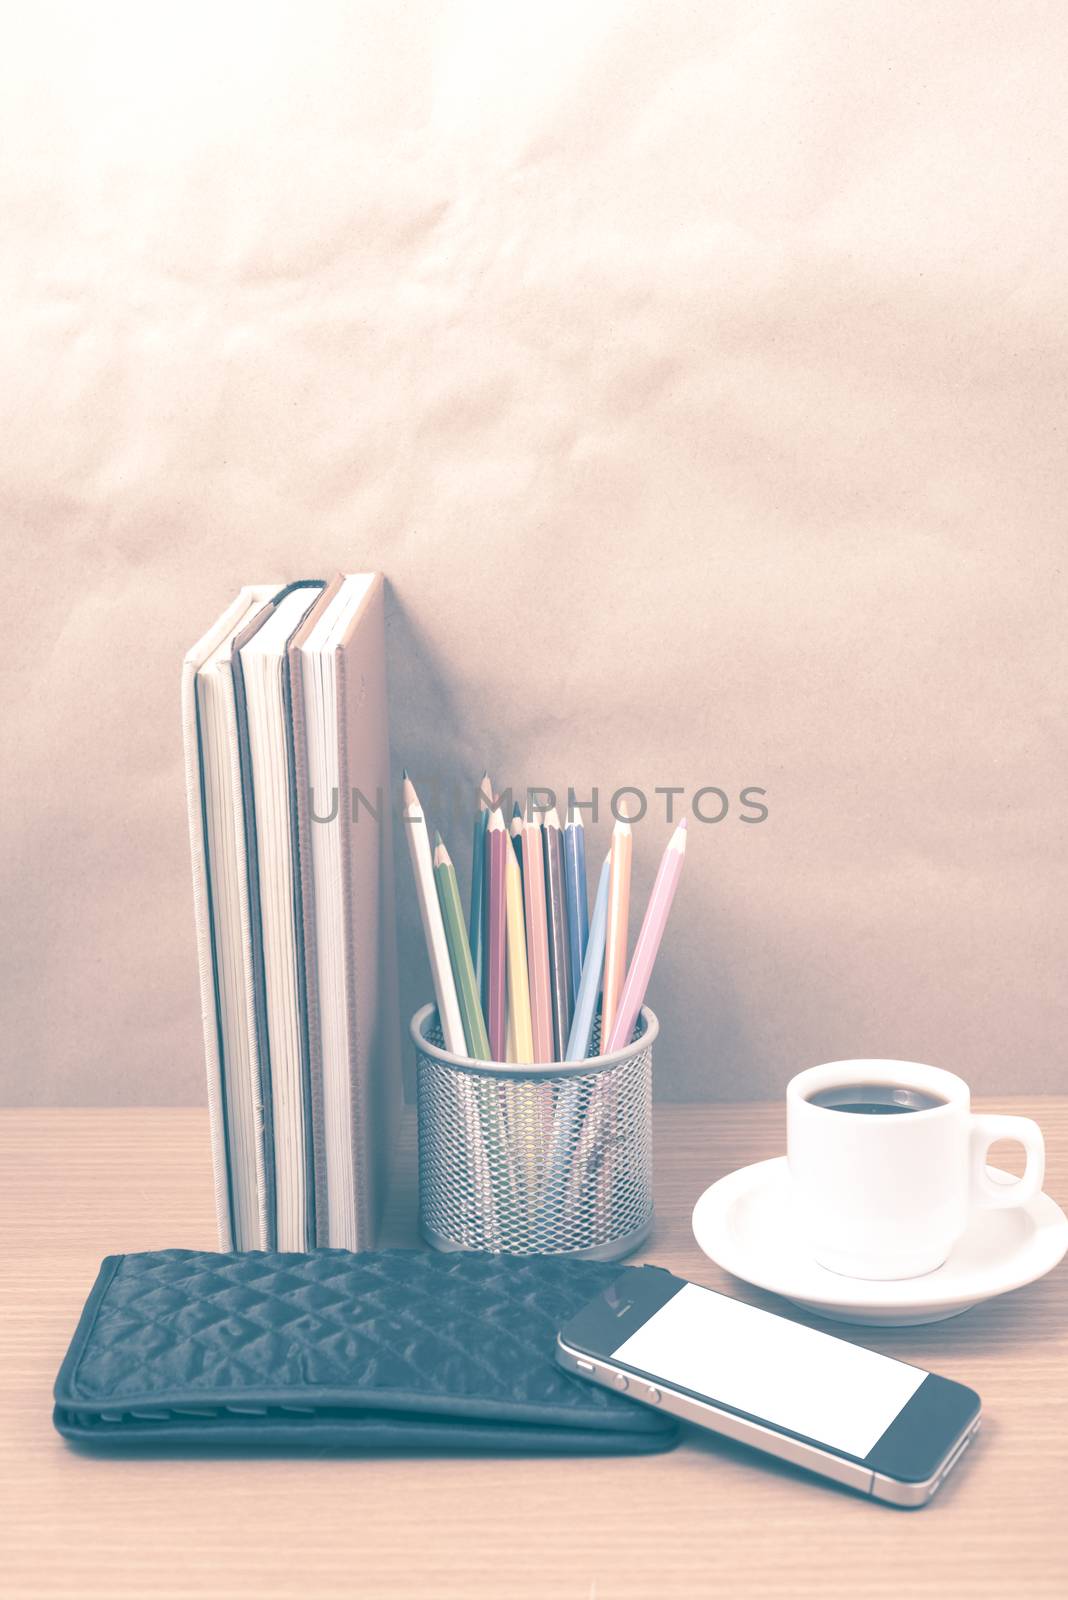 office desk : coffee with phone,stack of book,wallet,color box v by ammza12